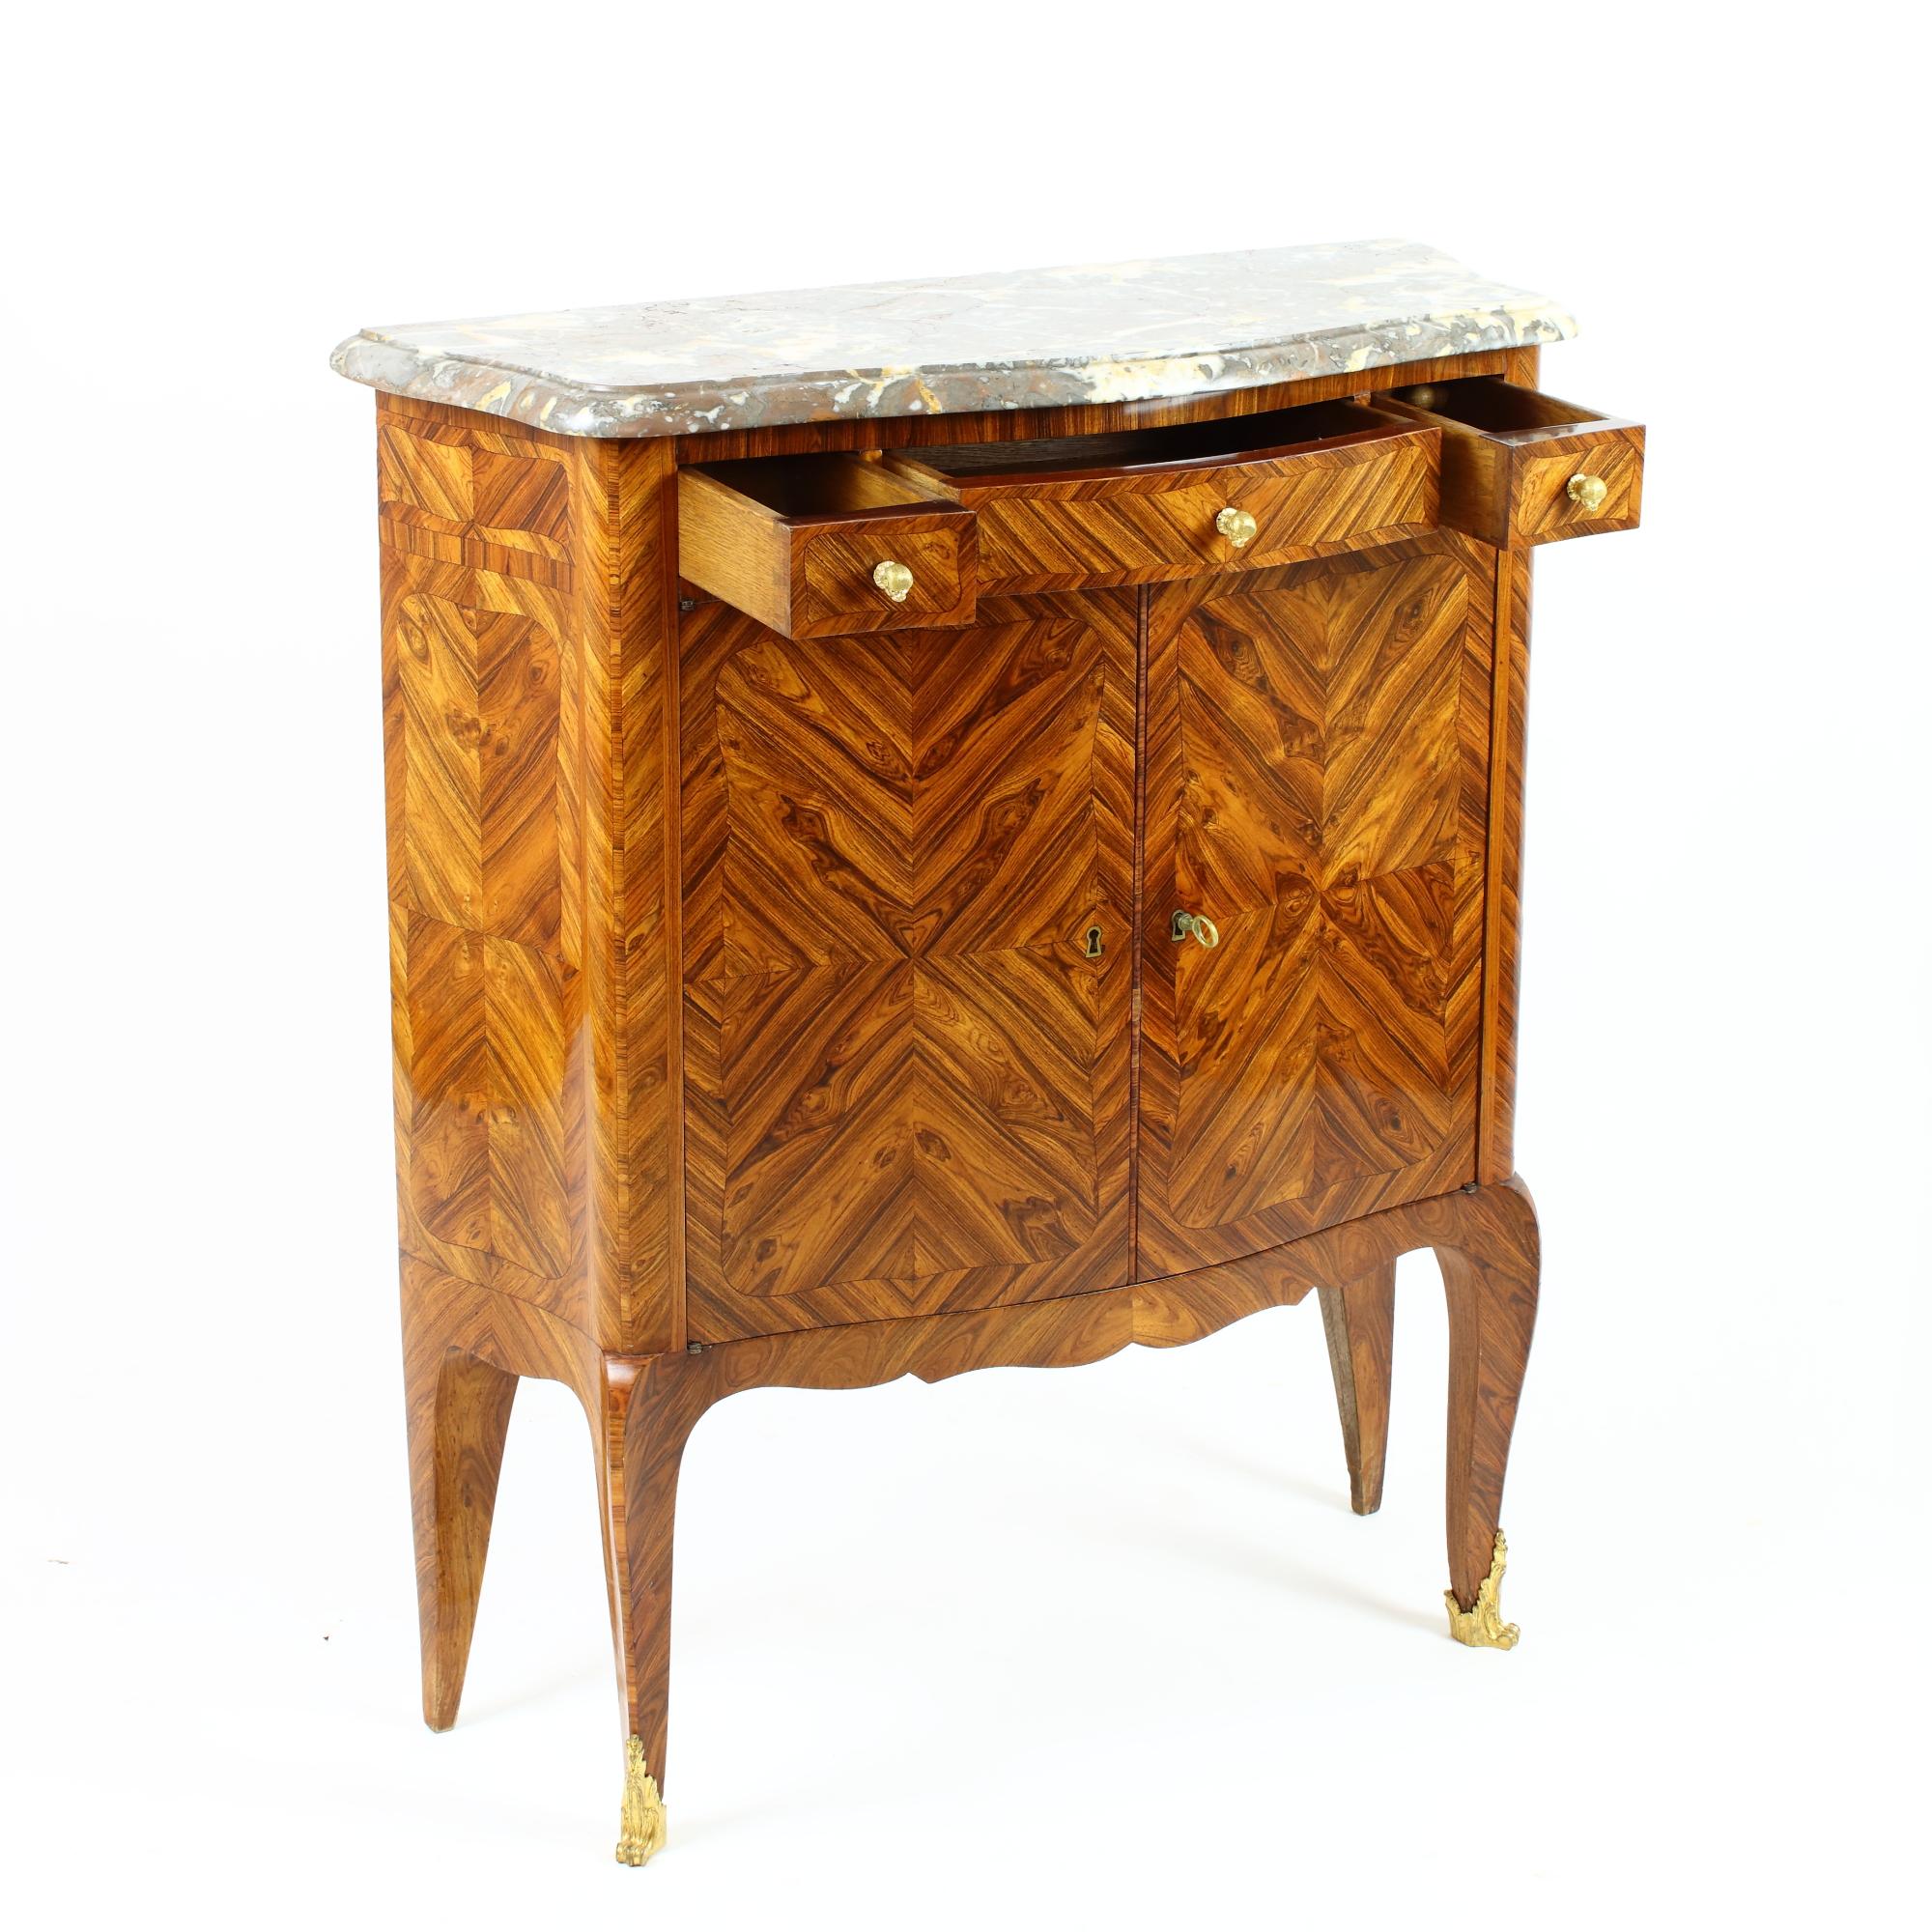 Small 19th Century French Marquetry NAP III Louis XV Cabinet or Meuble D’appui 1